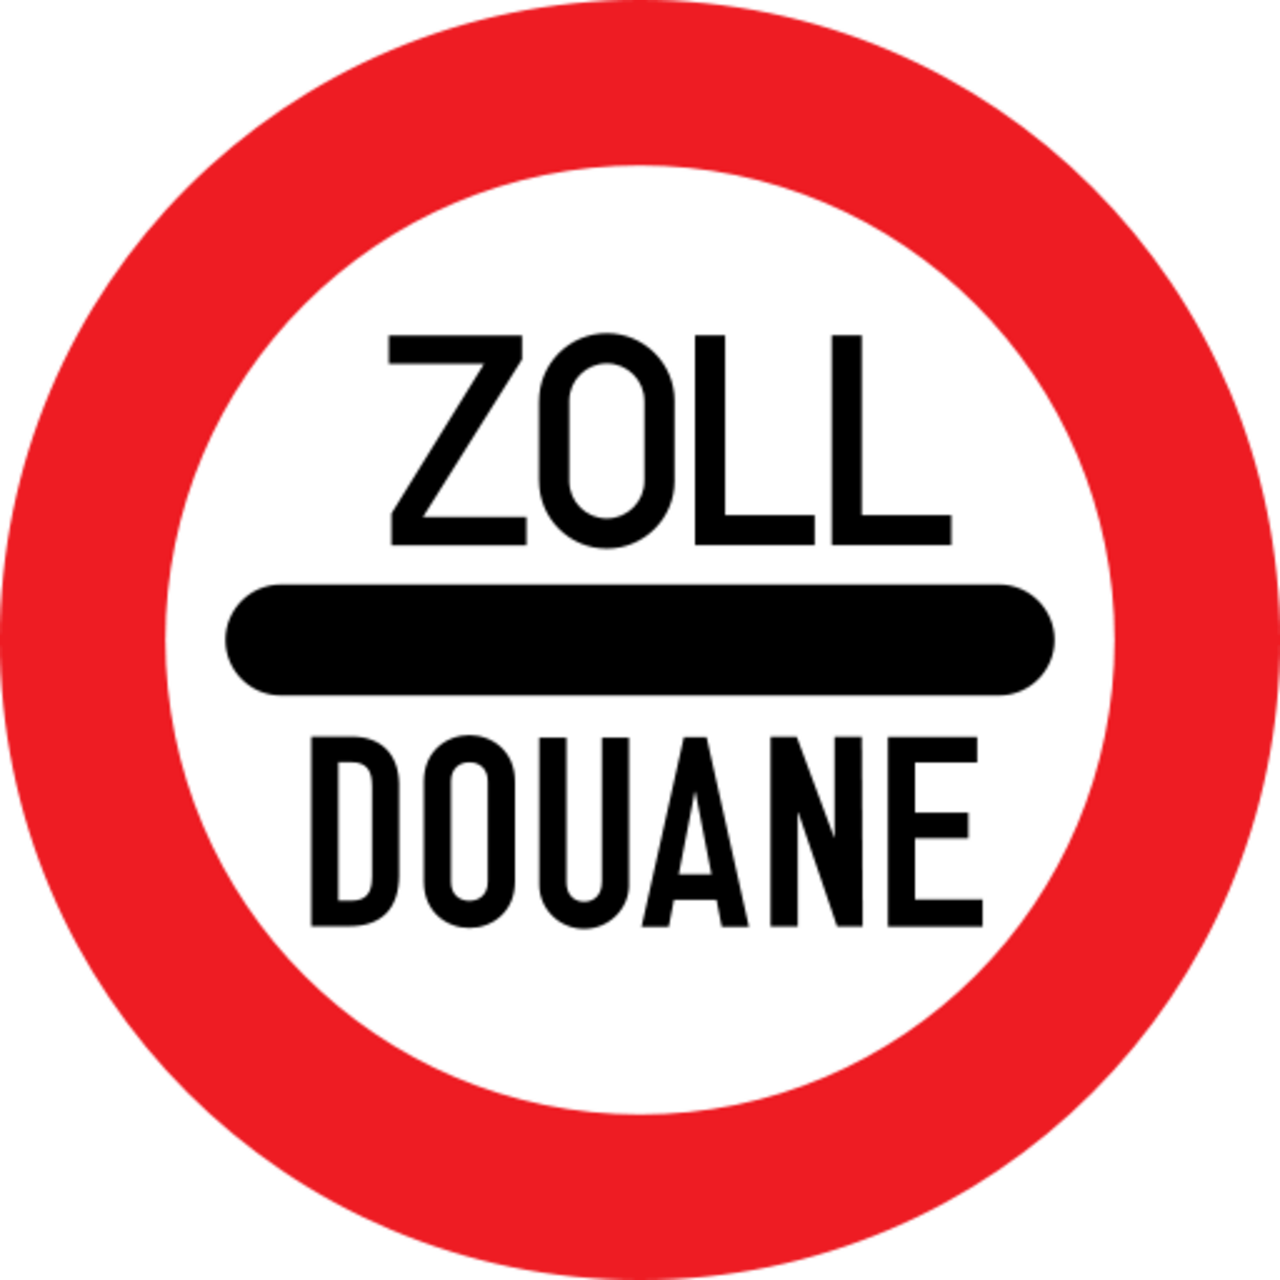 Zoll – Douane sign